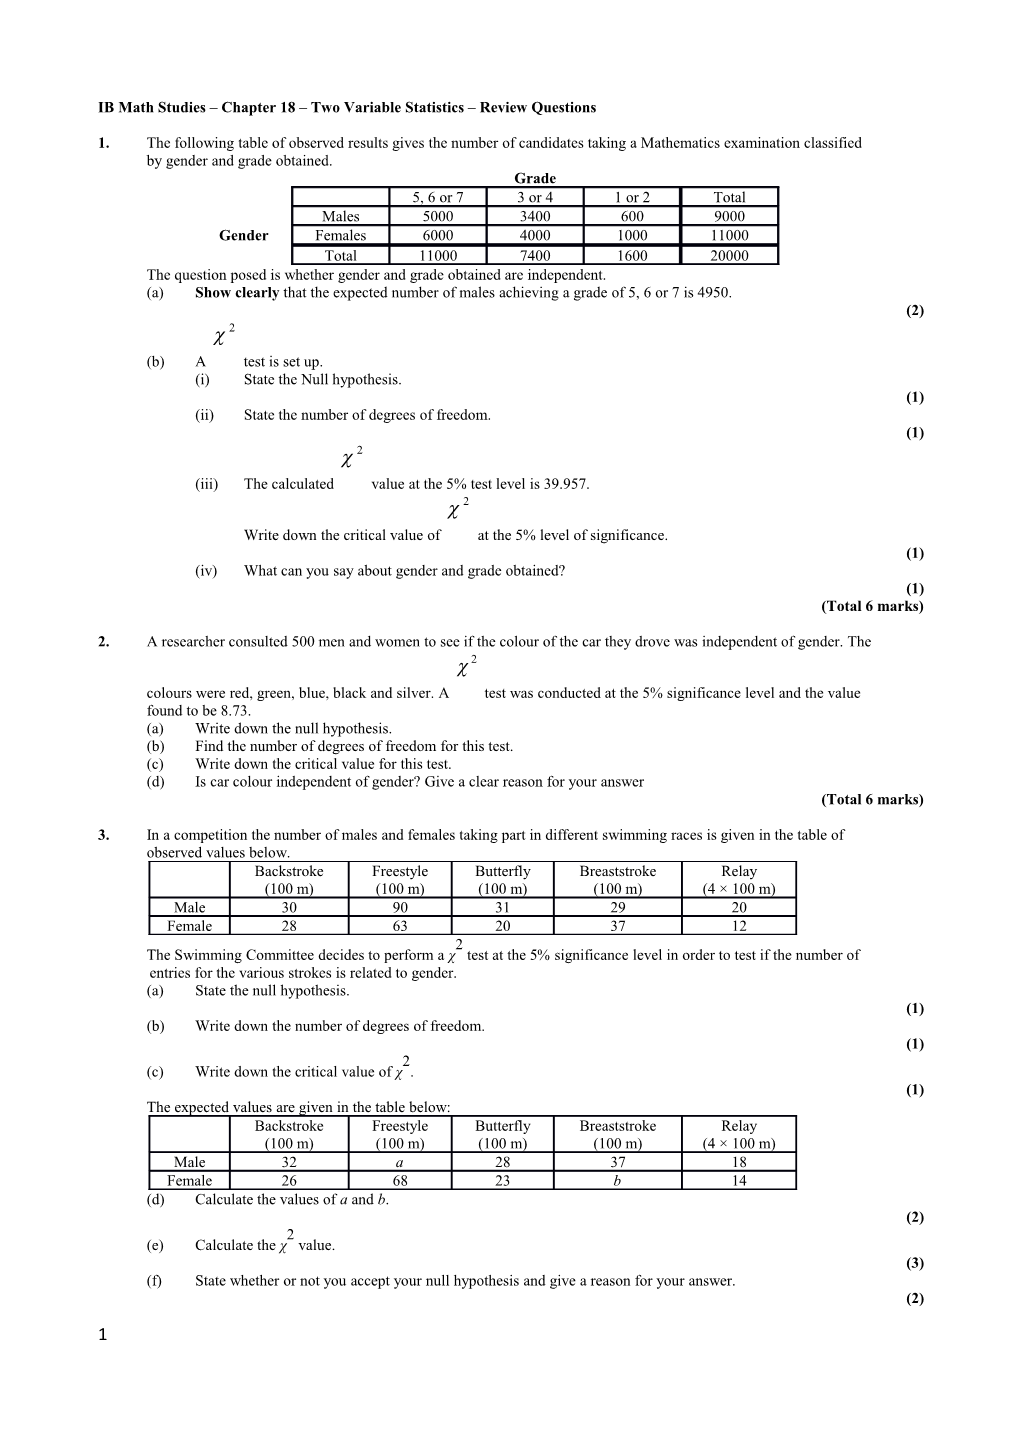 IB Math Studies Chapter 18 Two Variable Statistics Review Questions